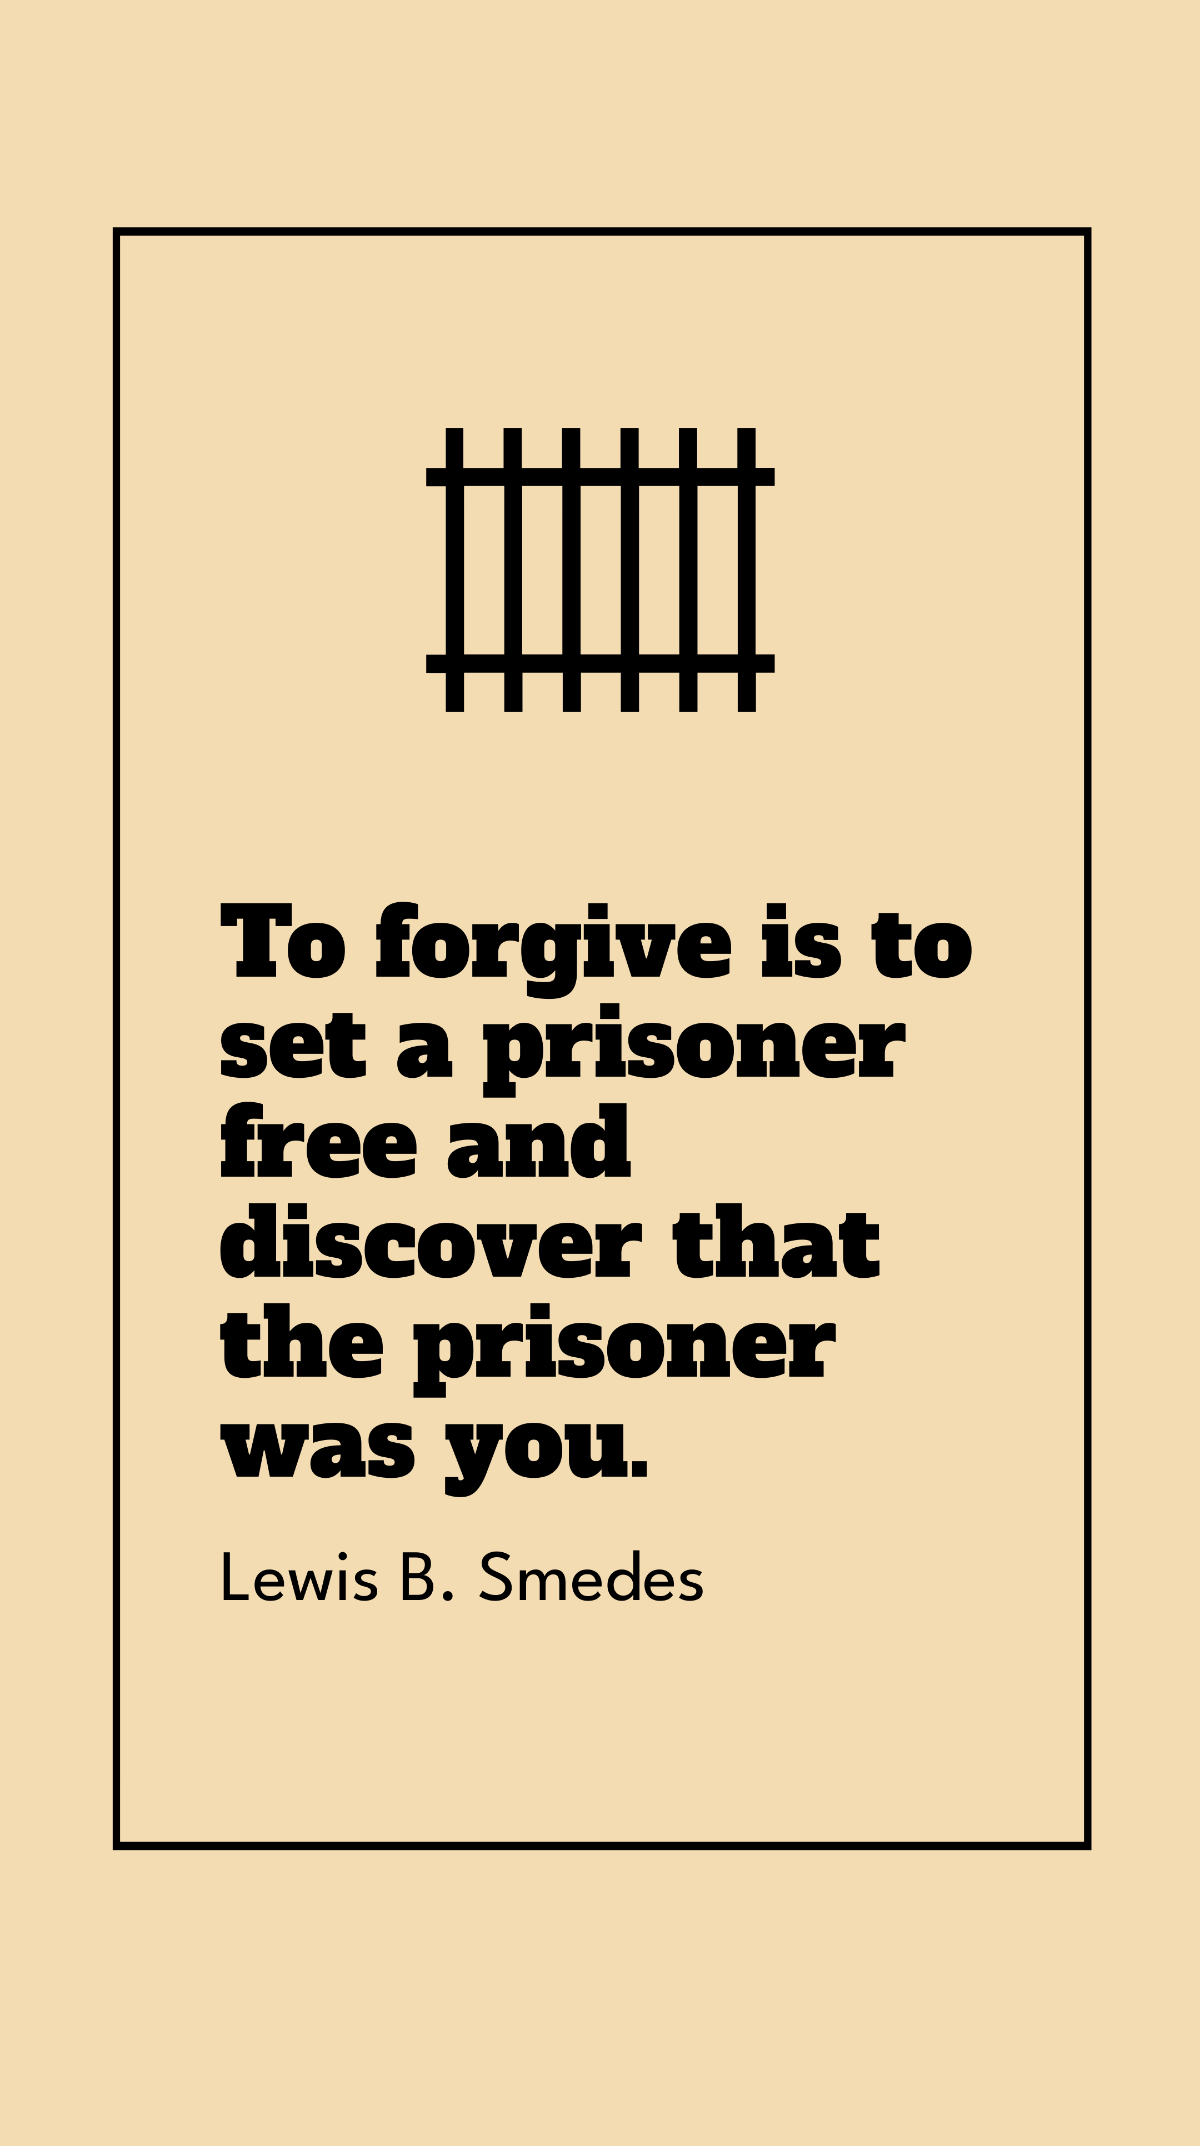 Lewis B. Smedes - To forgive is to set a prisoner and discover that the prisoner was you. Template